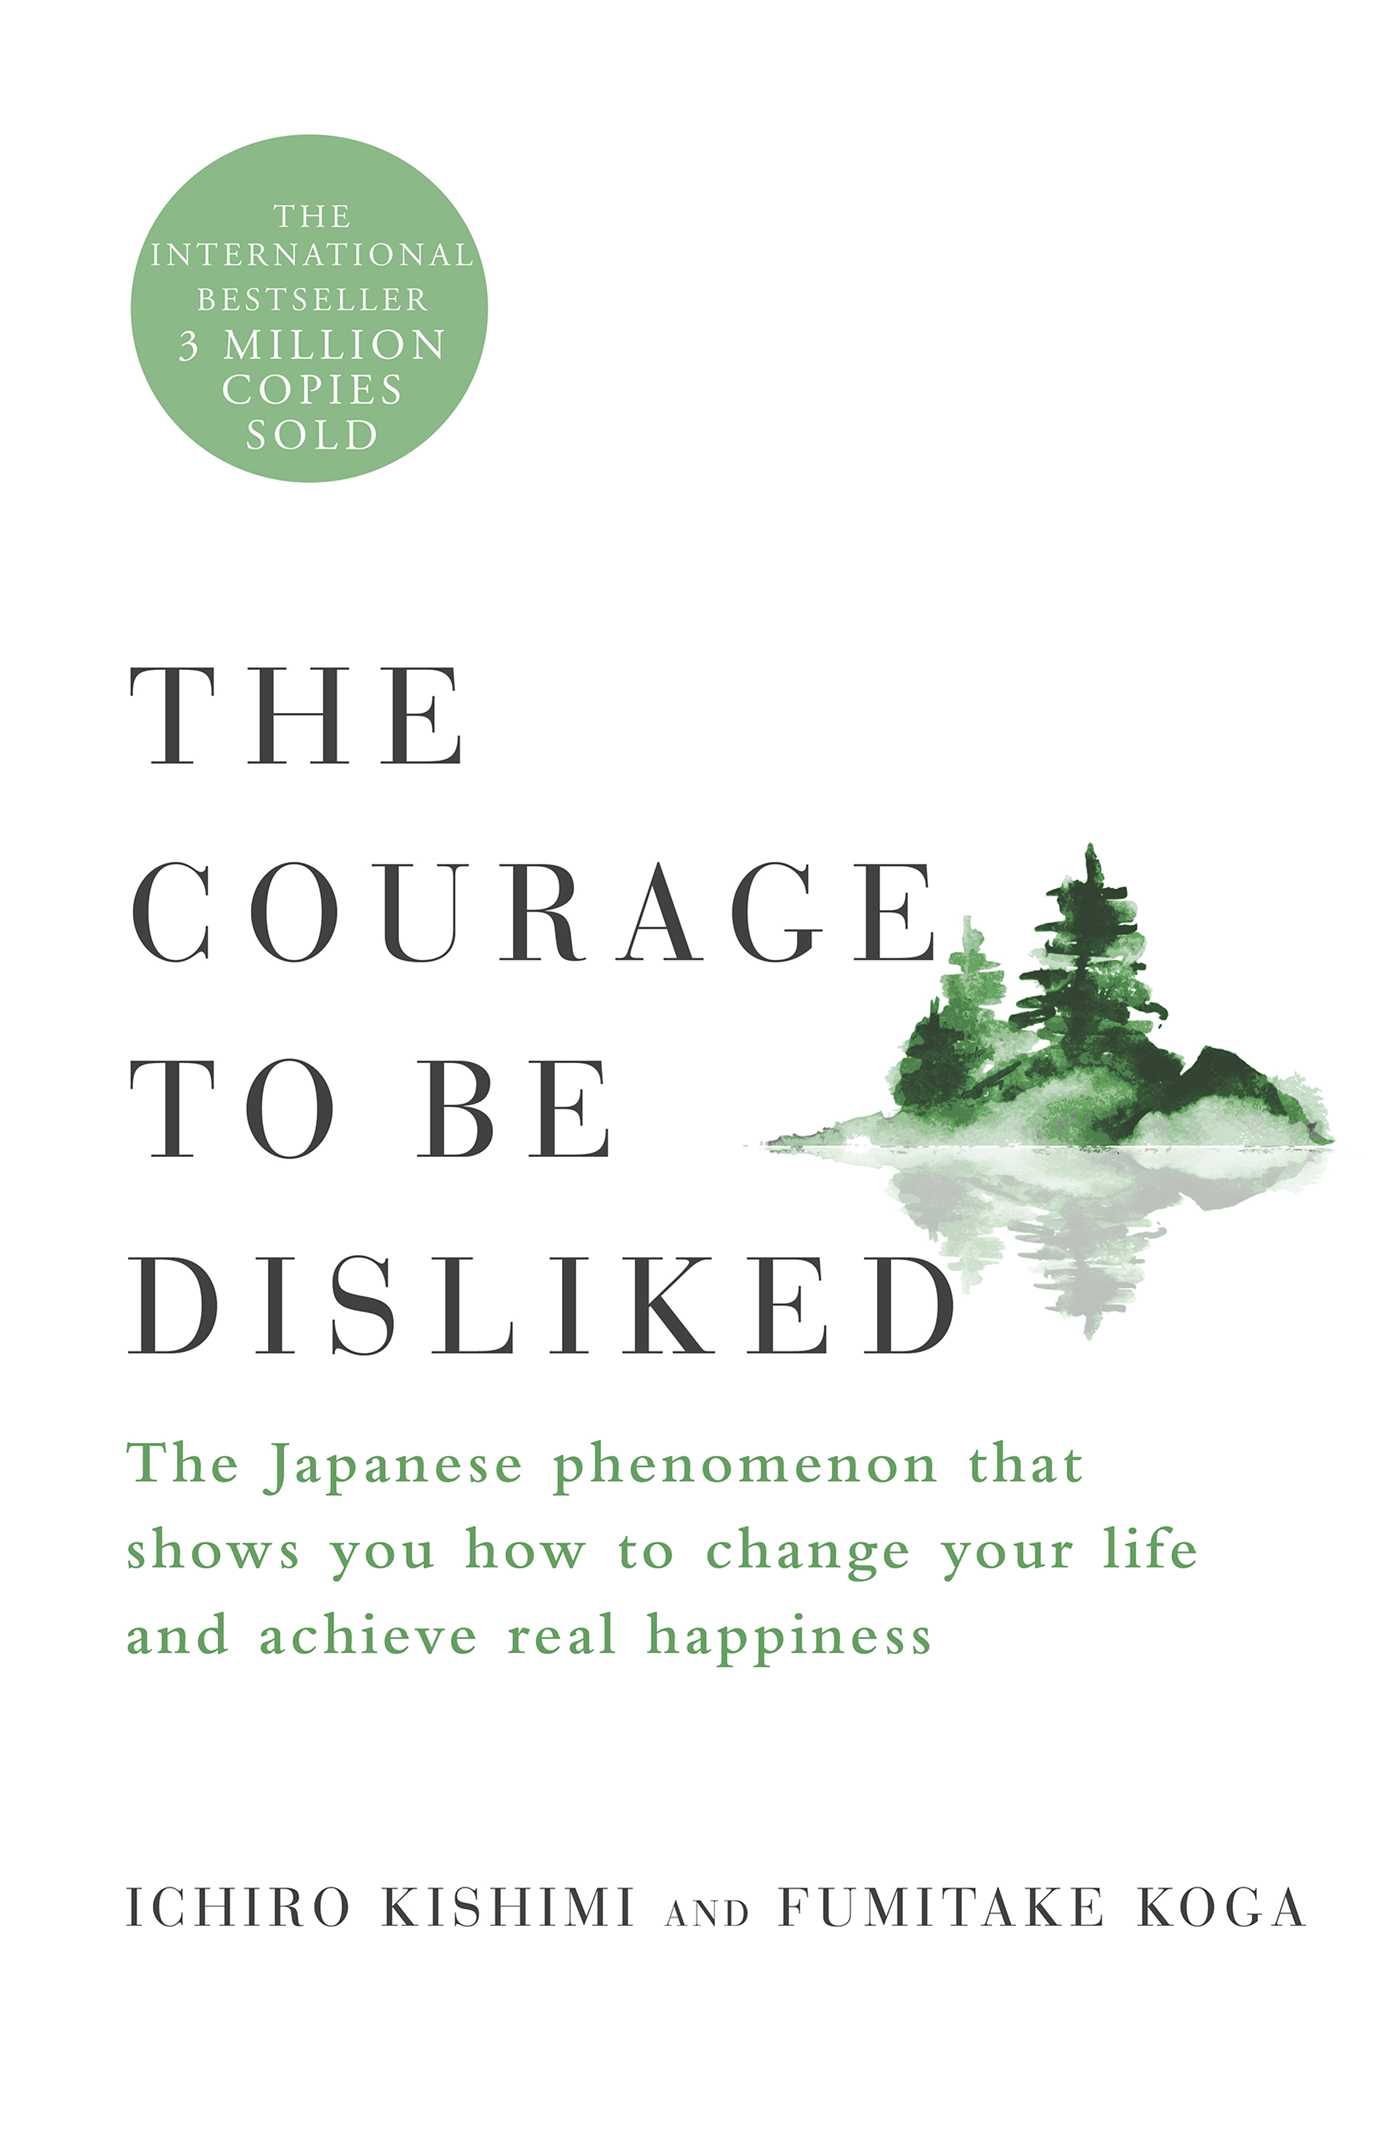 The Courage to Be Disliked : The Japanese Phenomenon That Shows You How to Change Your Life and Achieve Real Happiness | Psychology & Self-Improvement